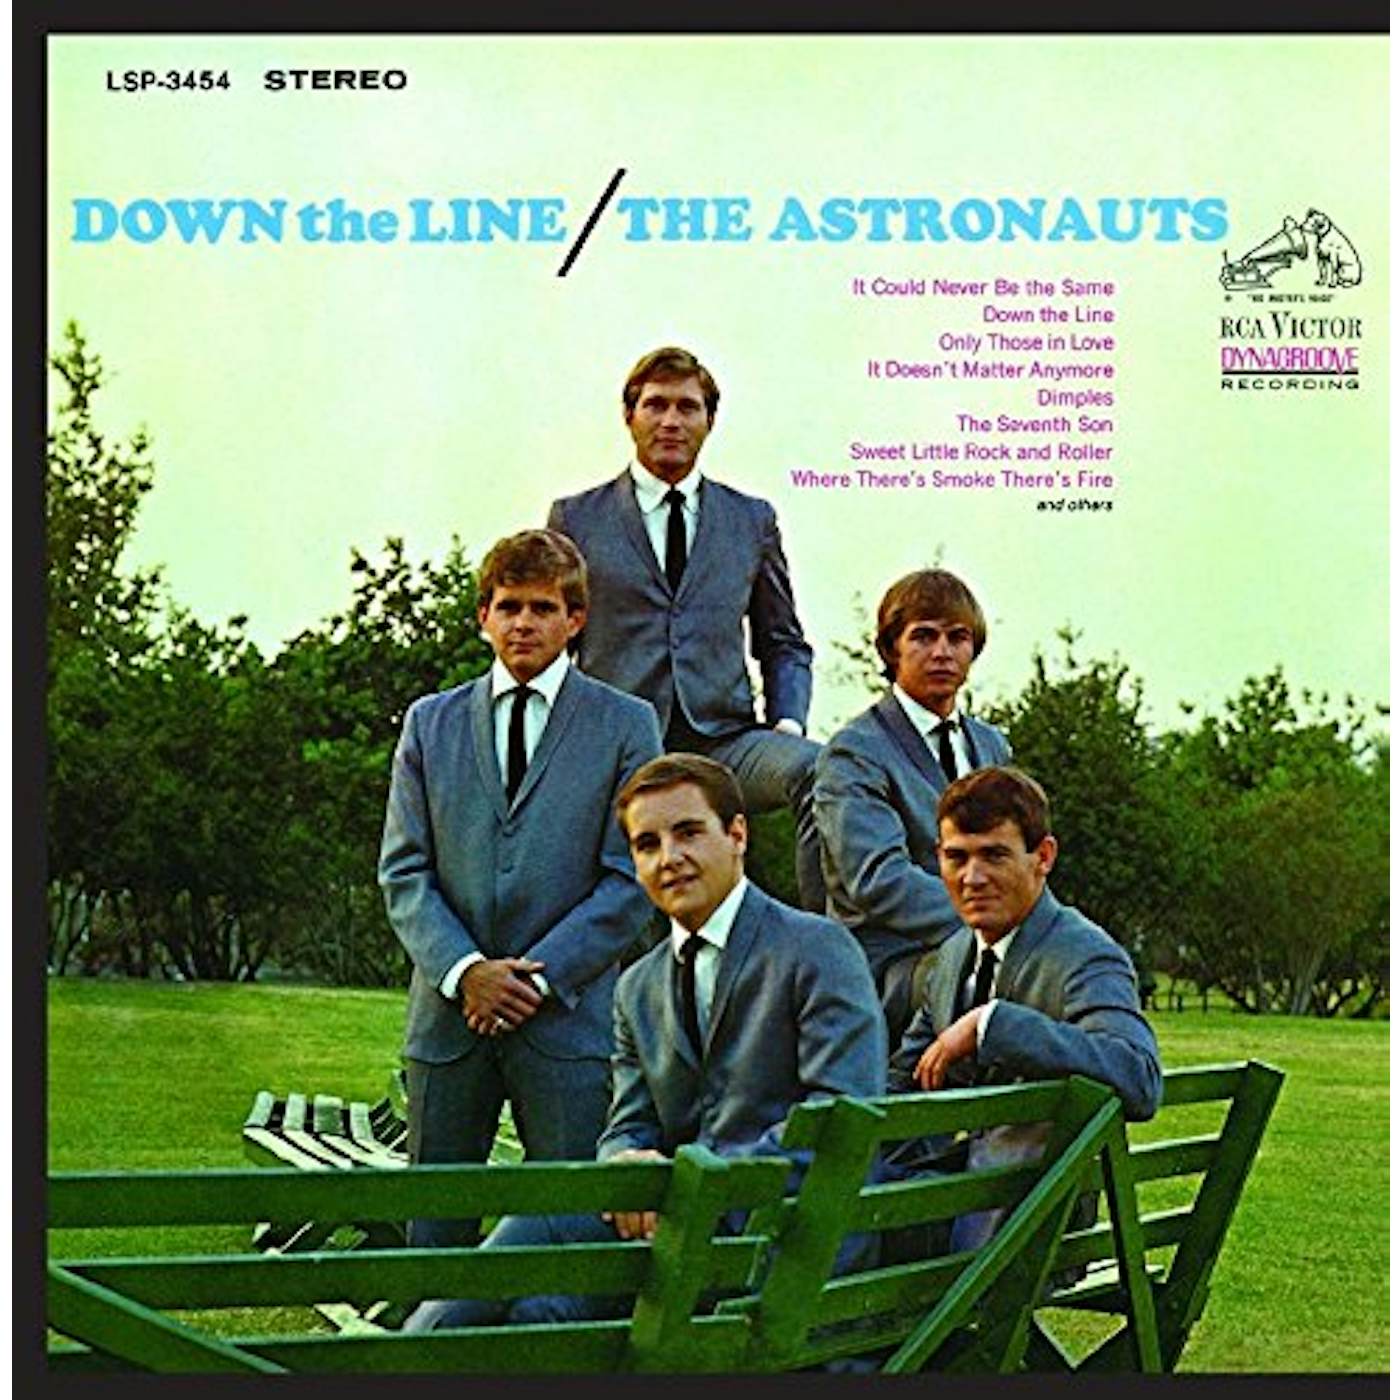 The Astronauts DOWN THE LINE CD